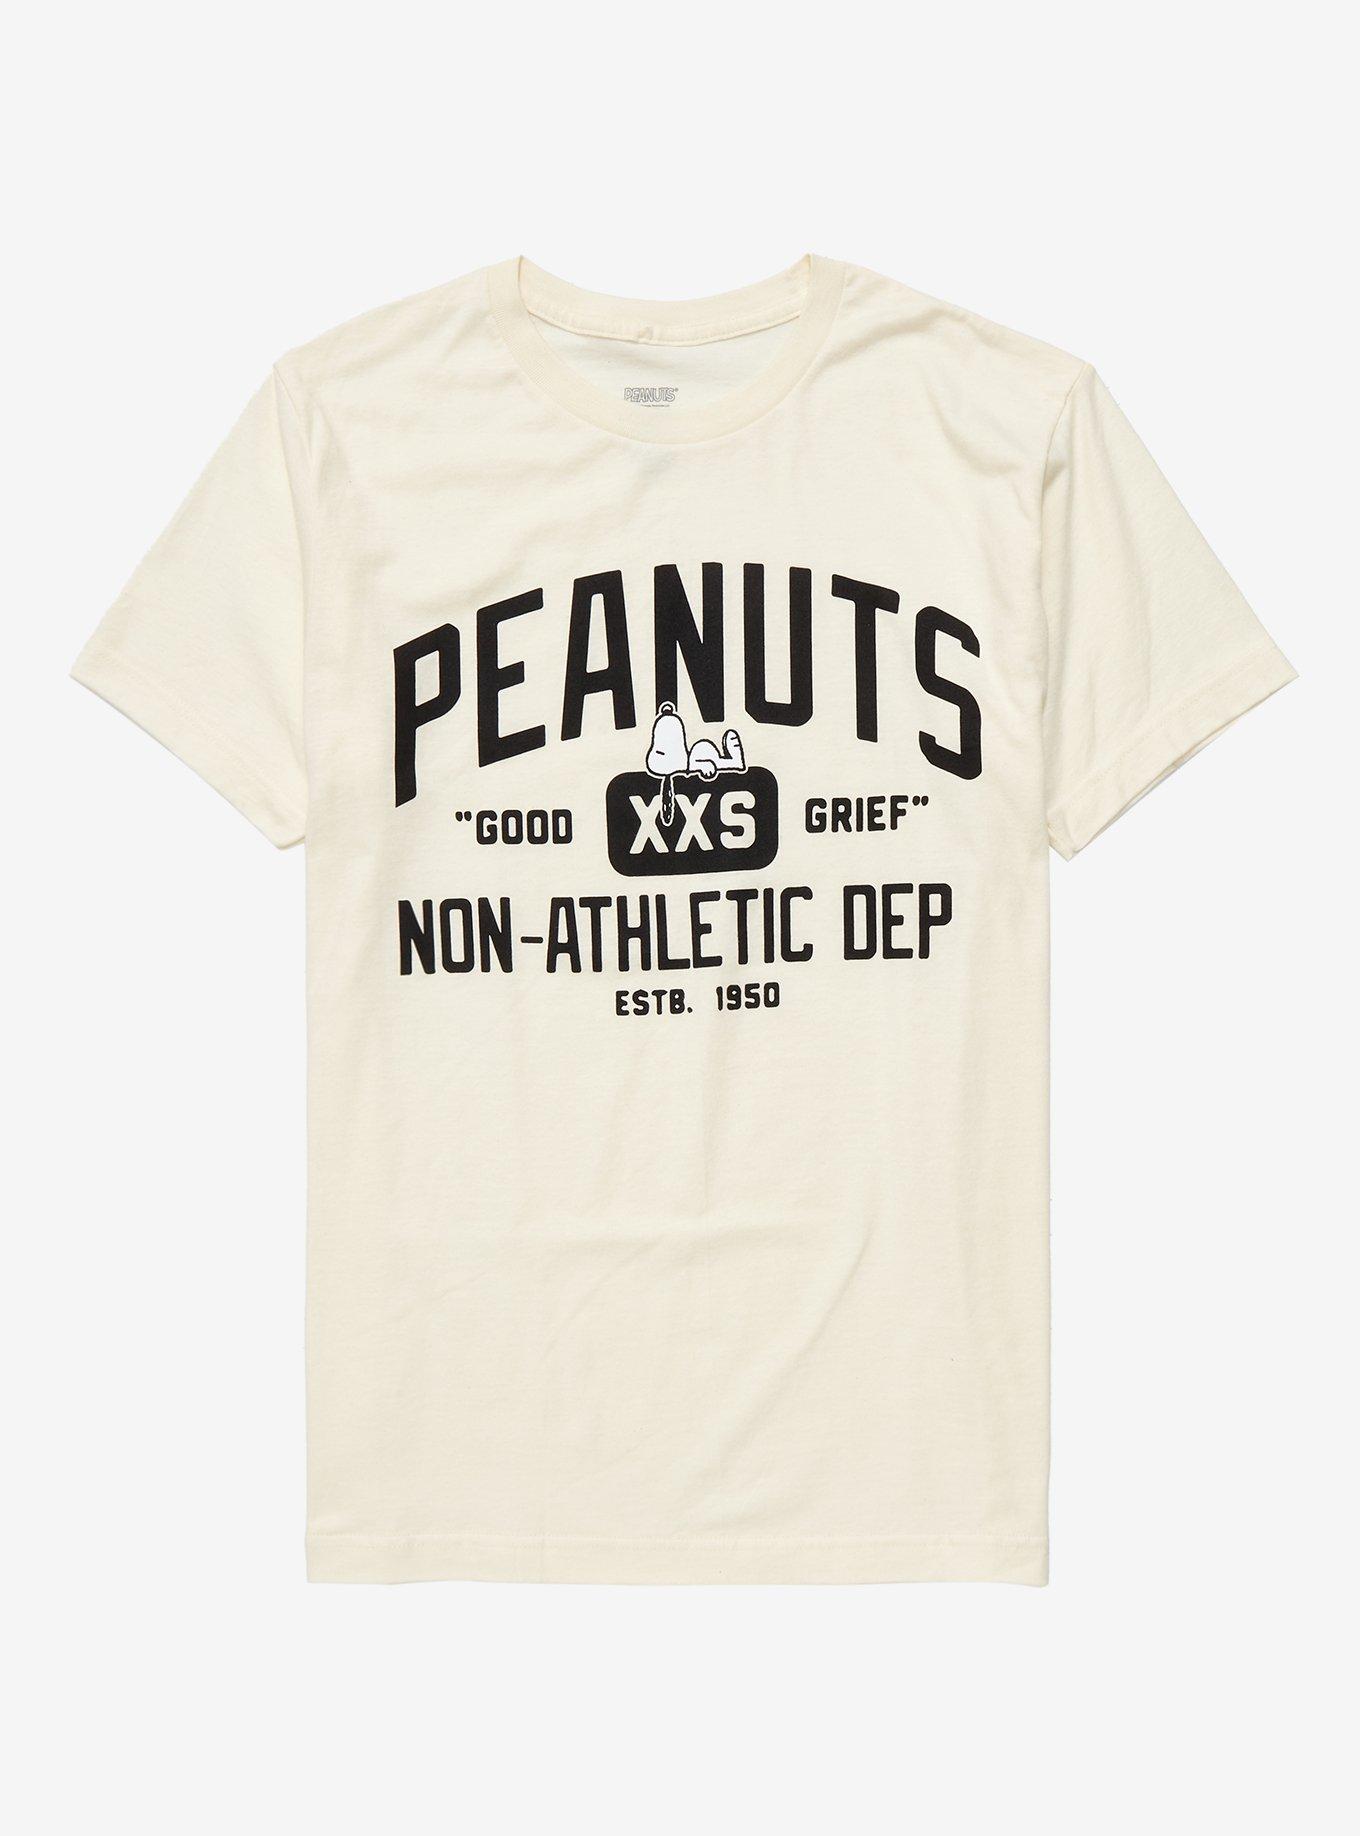 Peanuts Snoopy Non-Athletic Department BoxLunch T-Shirt - Exclusive BoxLunch 